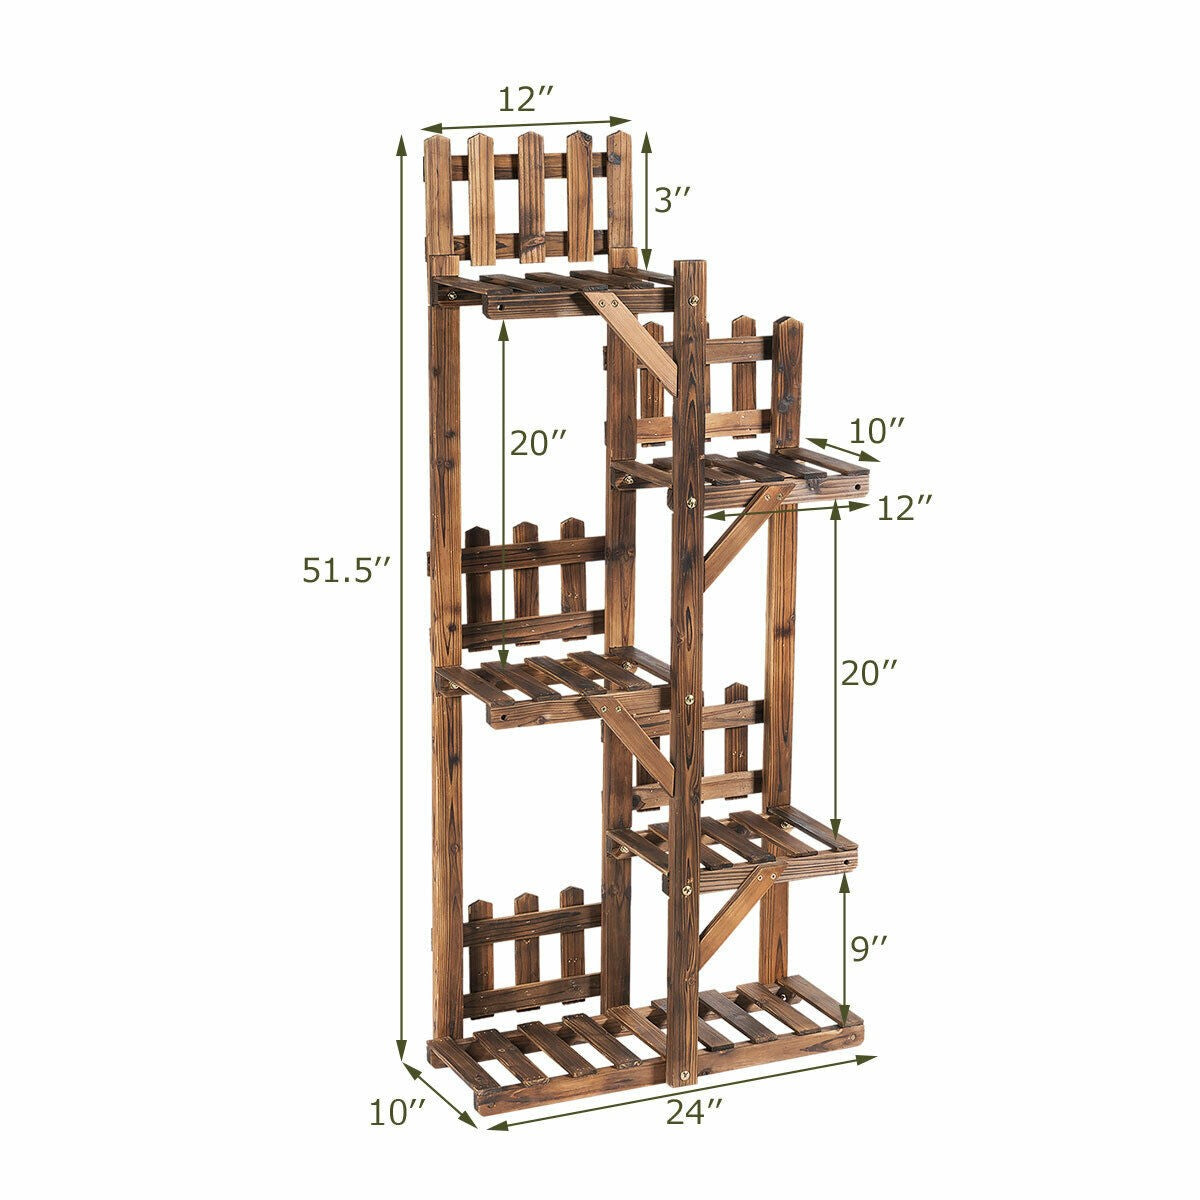 Giantex Wood Plant Stand Rack 5 Tier 6 Potted